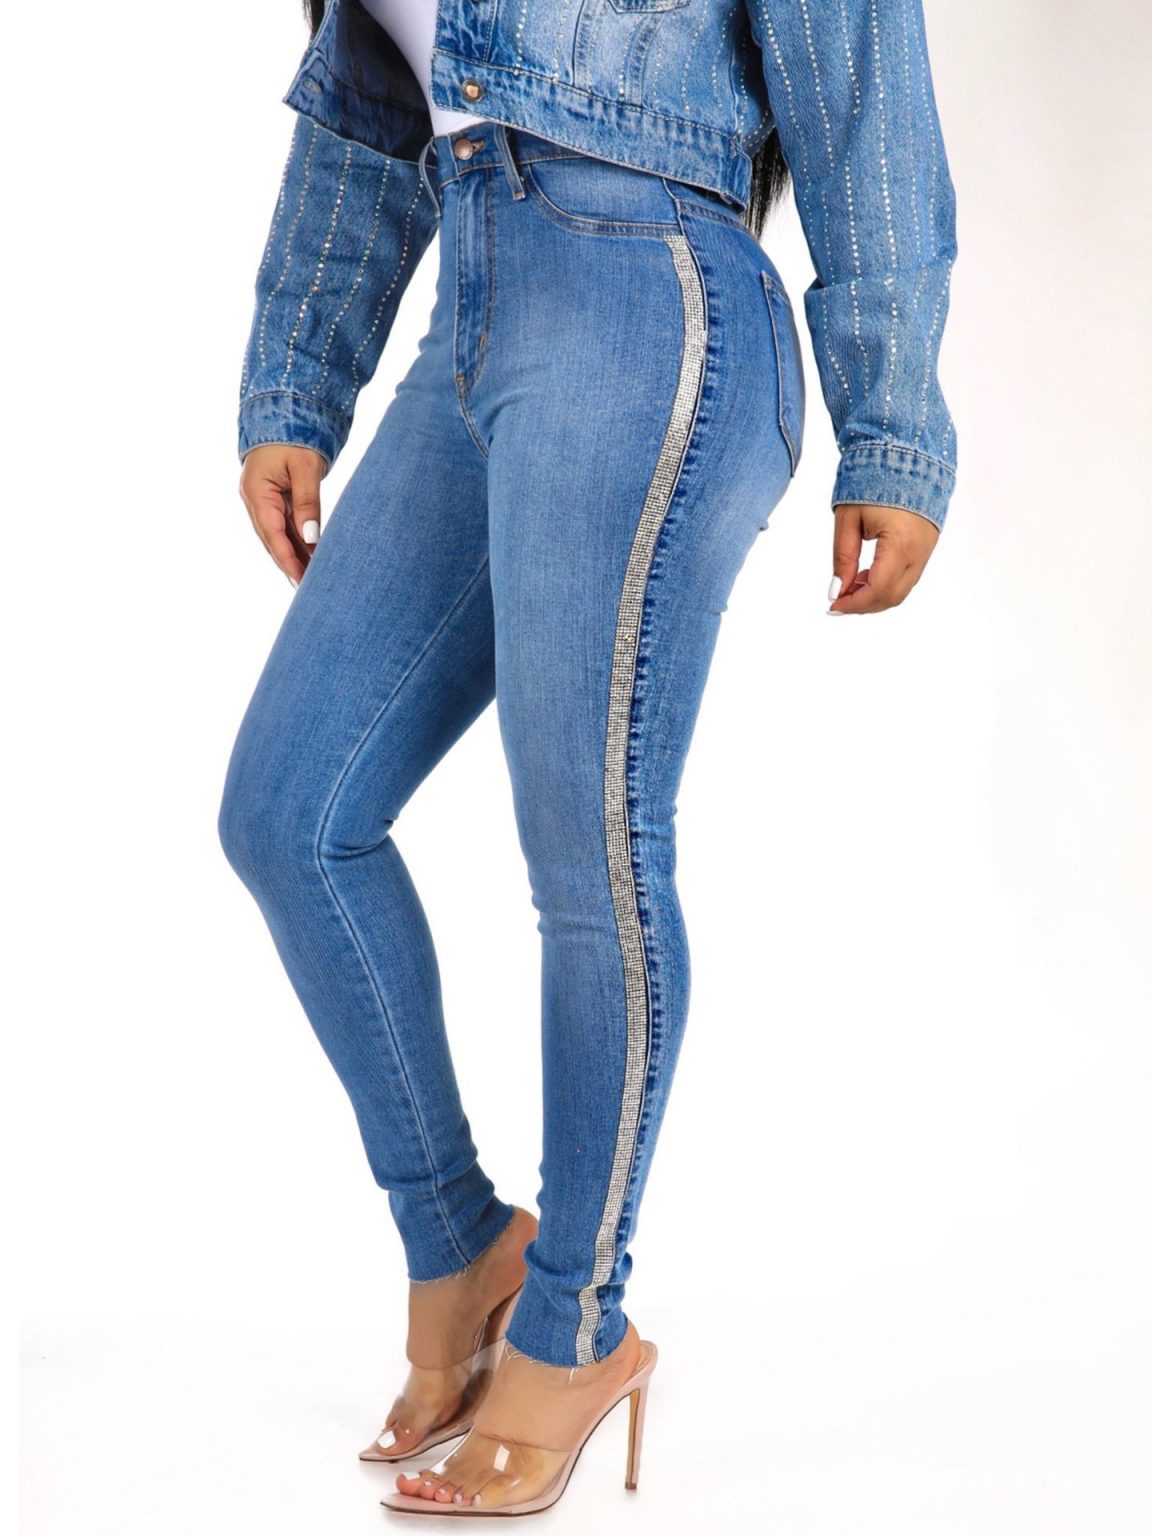 Custom Attractive Side Rhinestones High Waisted Jeans For Women